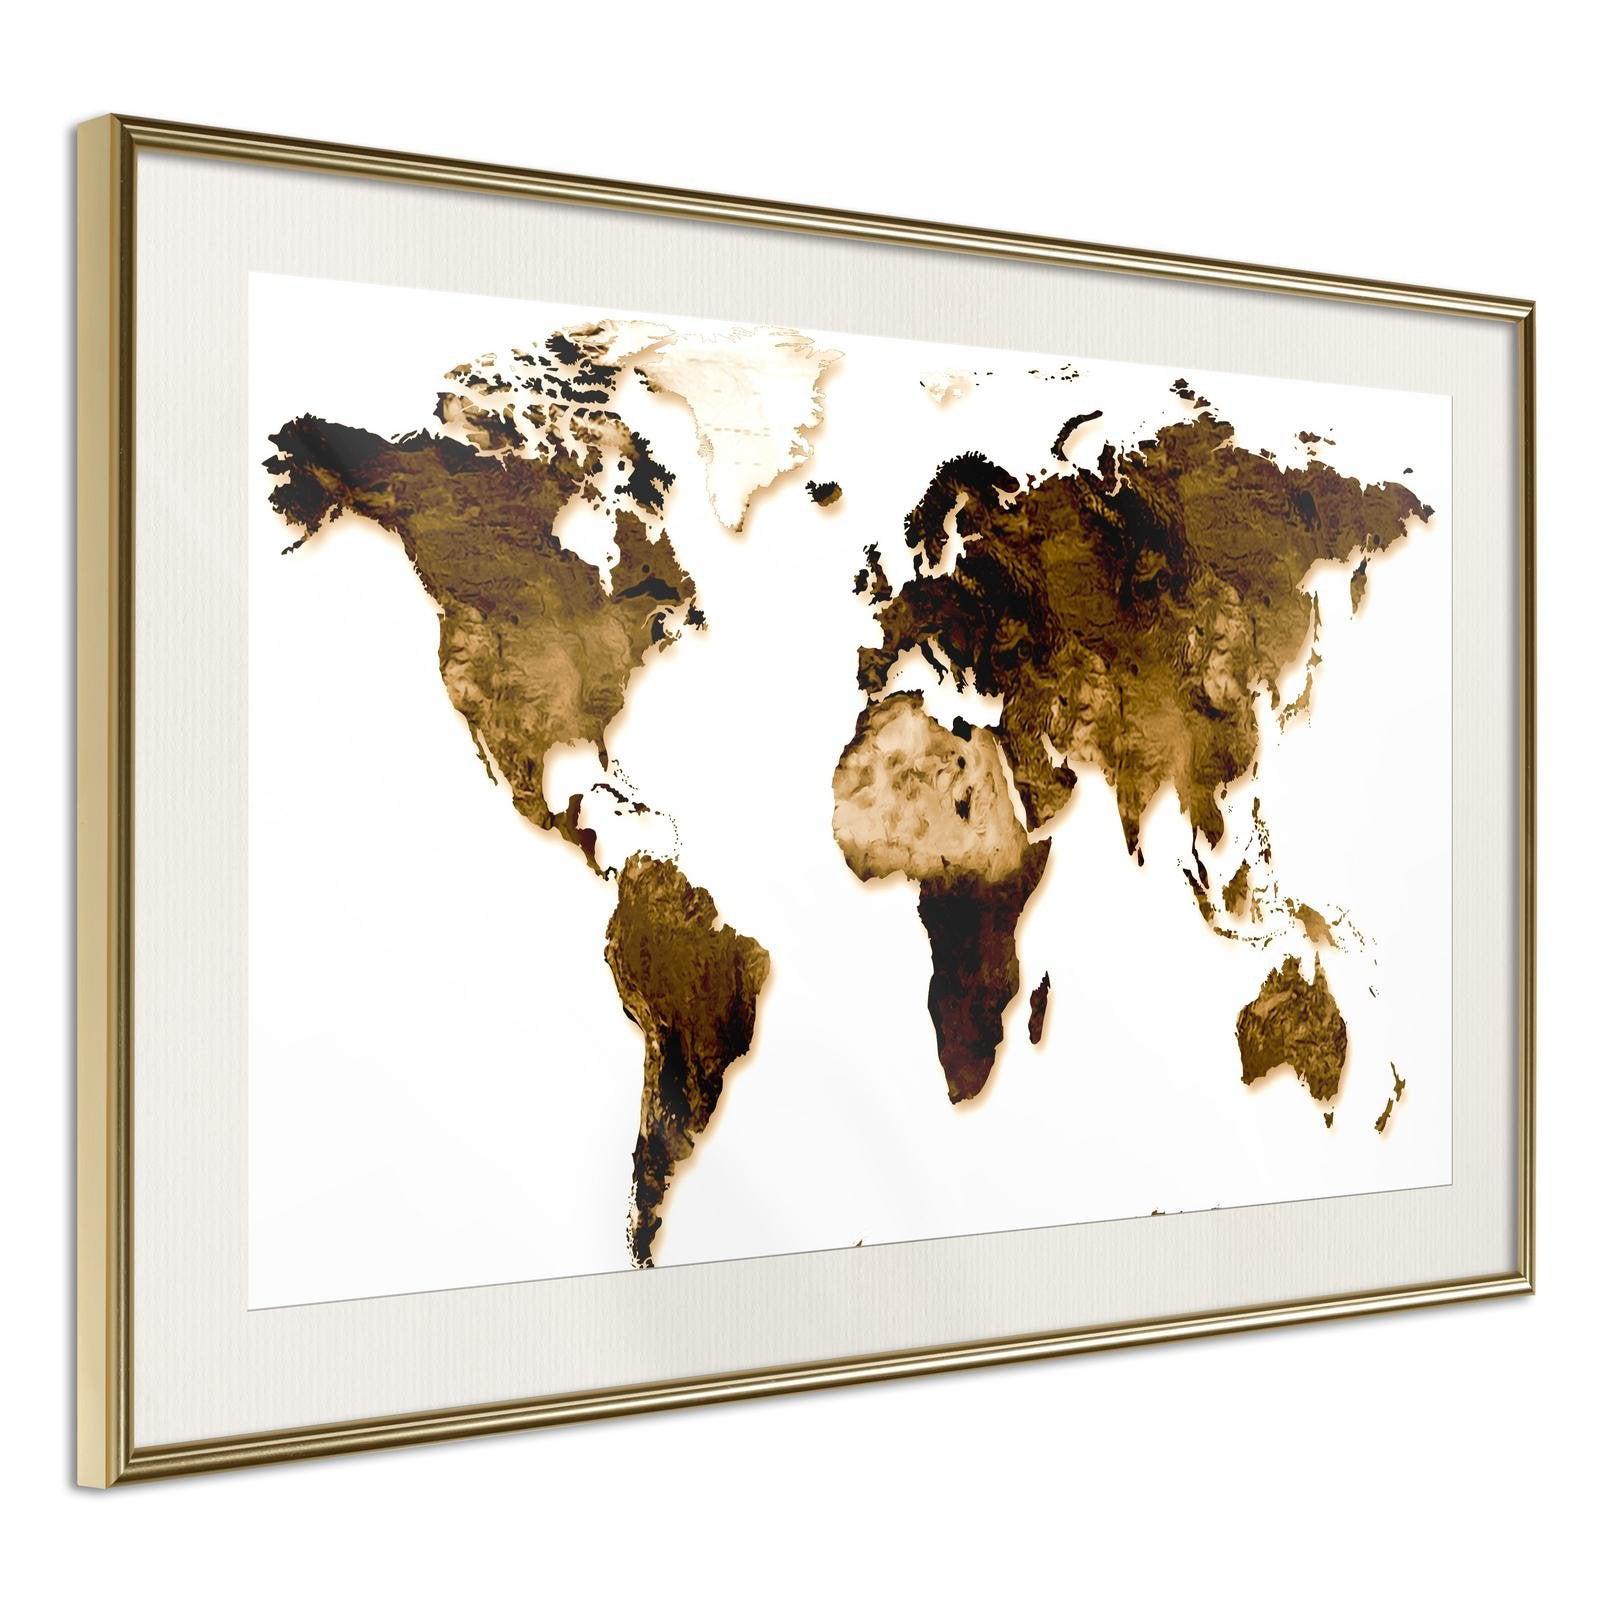 Inramad Poster / Tavla - Our World-Poster Inramad-Artgeist-30x20-Guldram med passepartout-peaceofhome.se